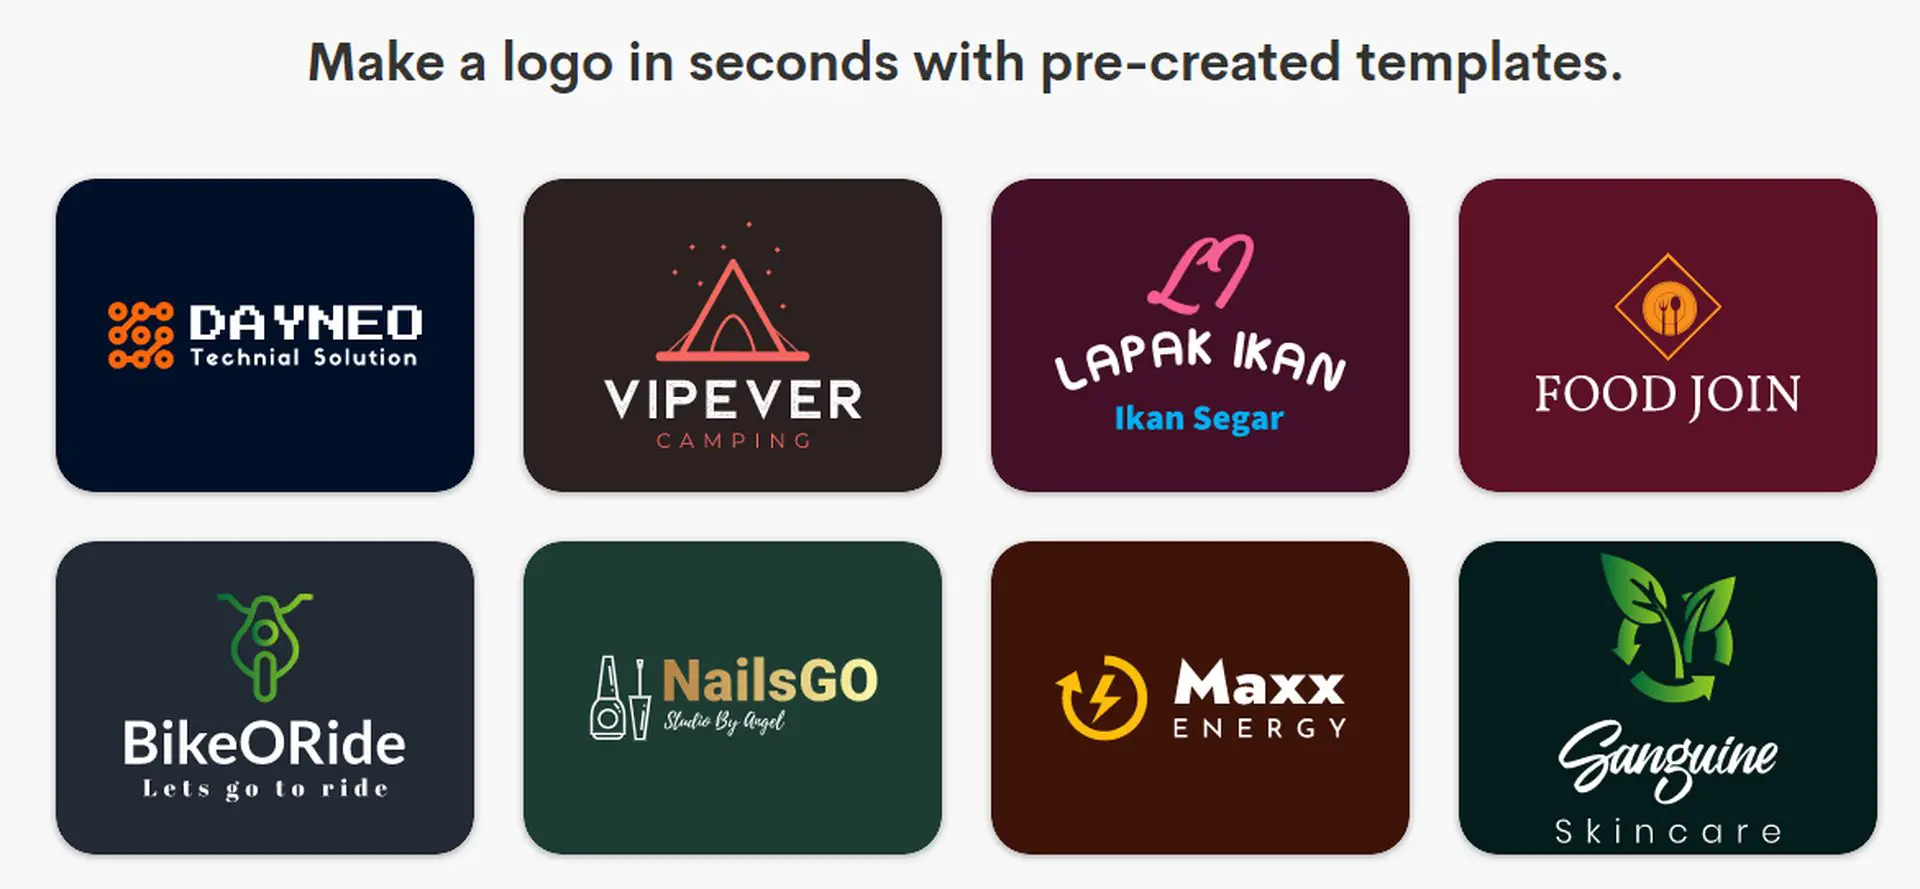 What is the best AI logo generator free? We explained some of the top logo makers, such as Wix, Hatchful, and more. Keep reading and learn more